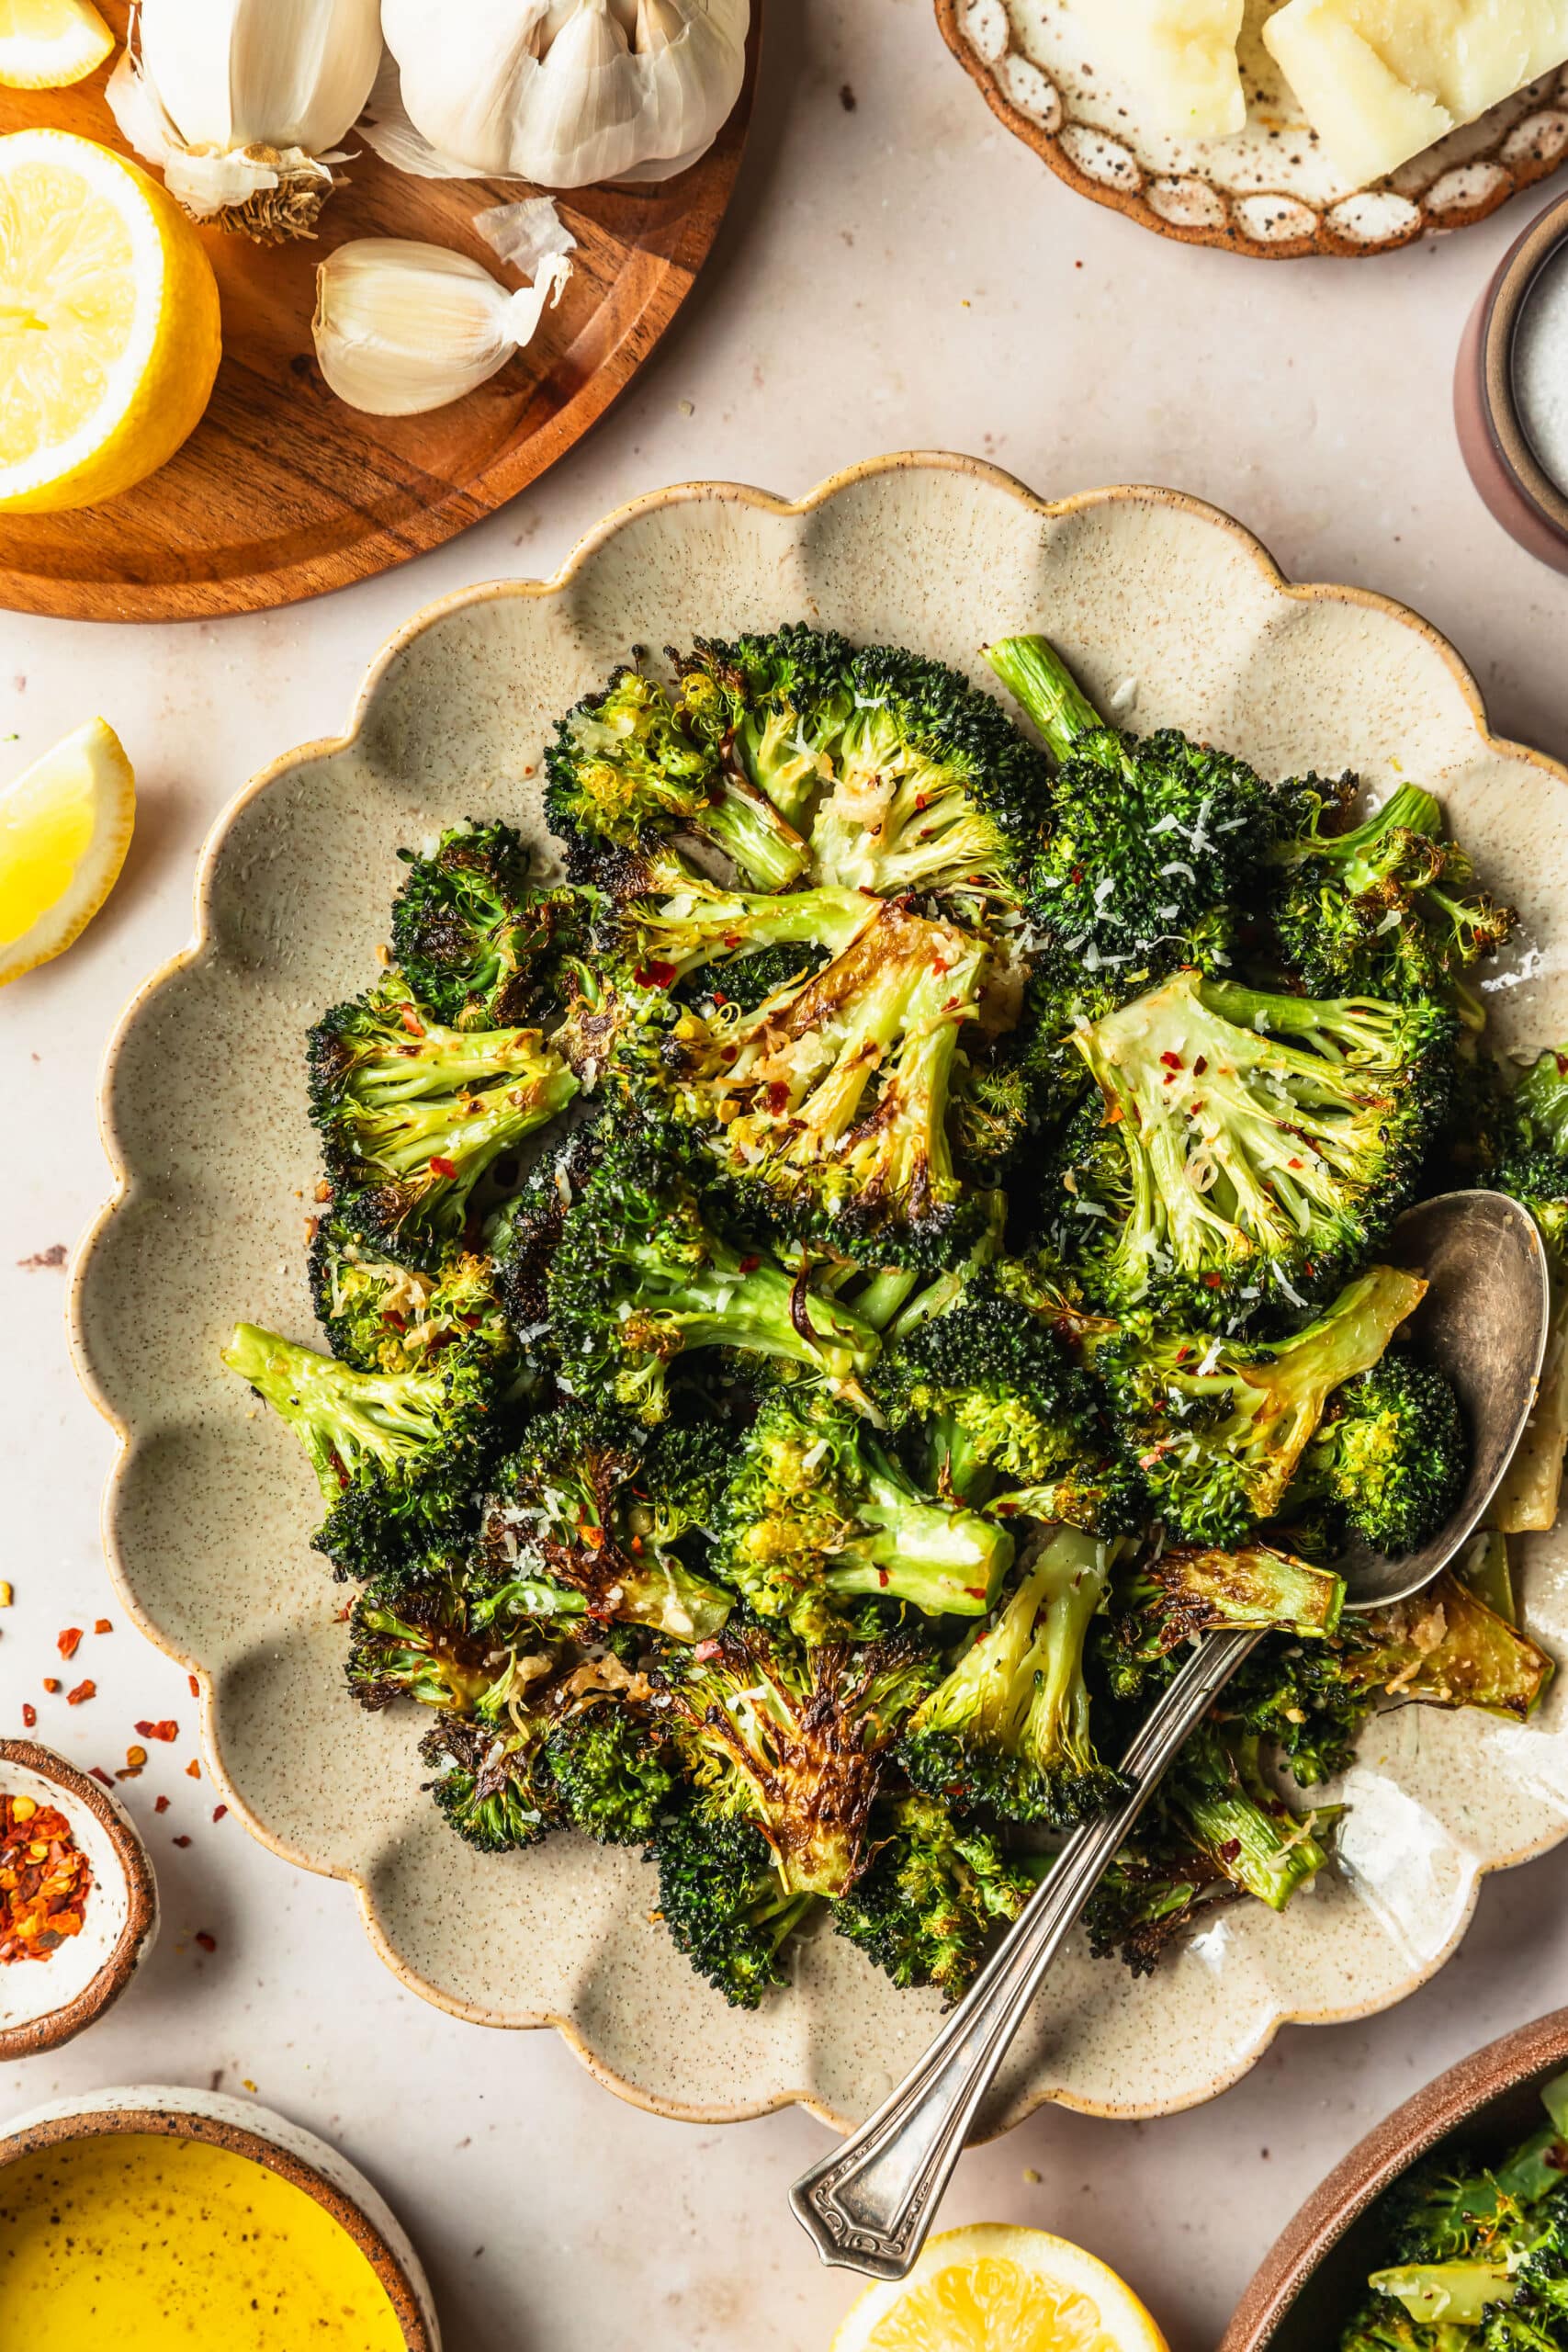 A cream-colored plate of charred broccoli on a tan counter next to white and brown bowls of parmesan, lemon, salt, red pepper flakes, oil, and more broccoli.